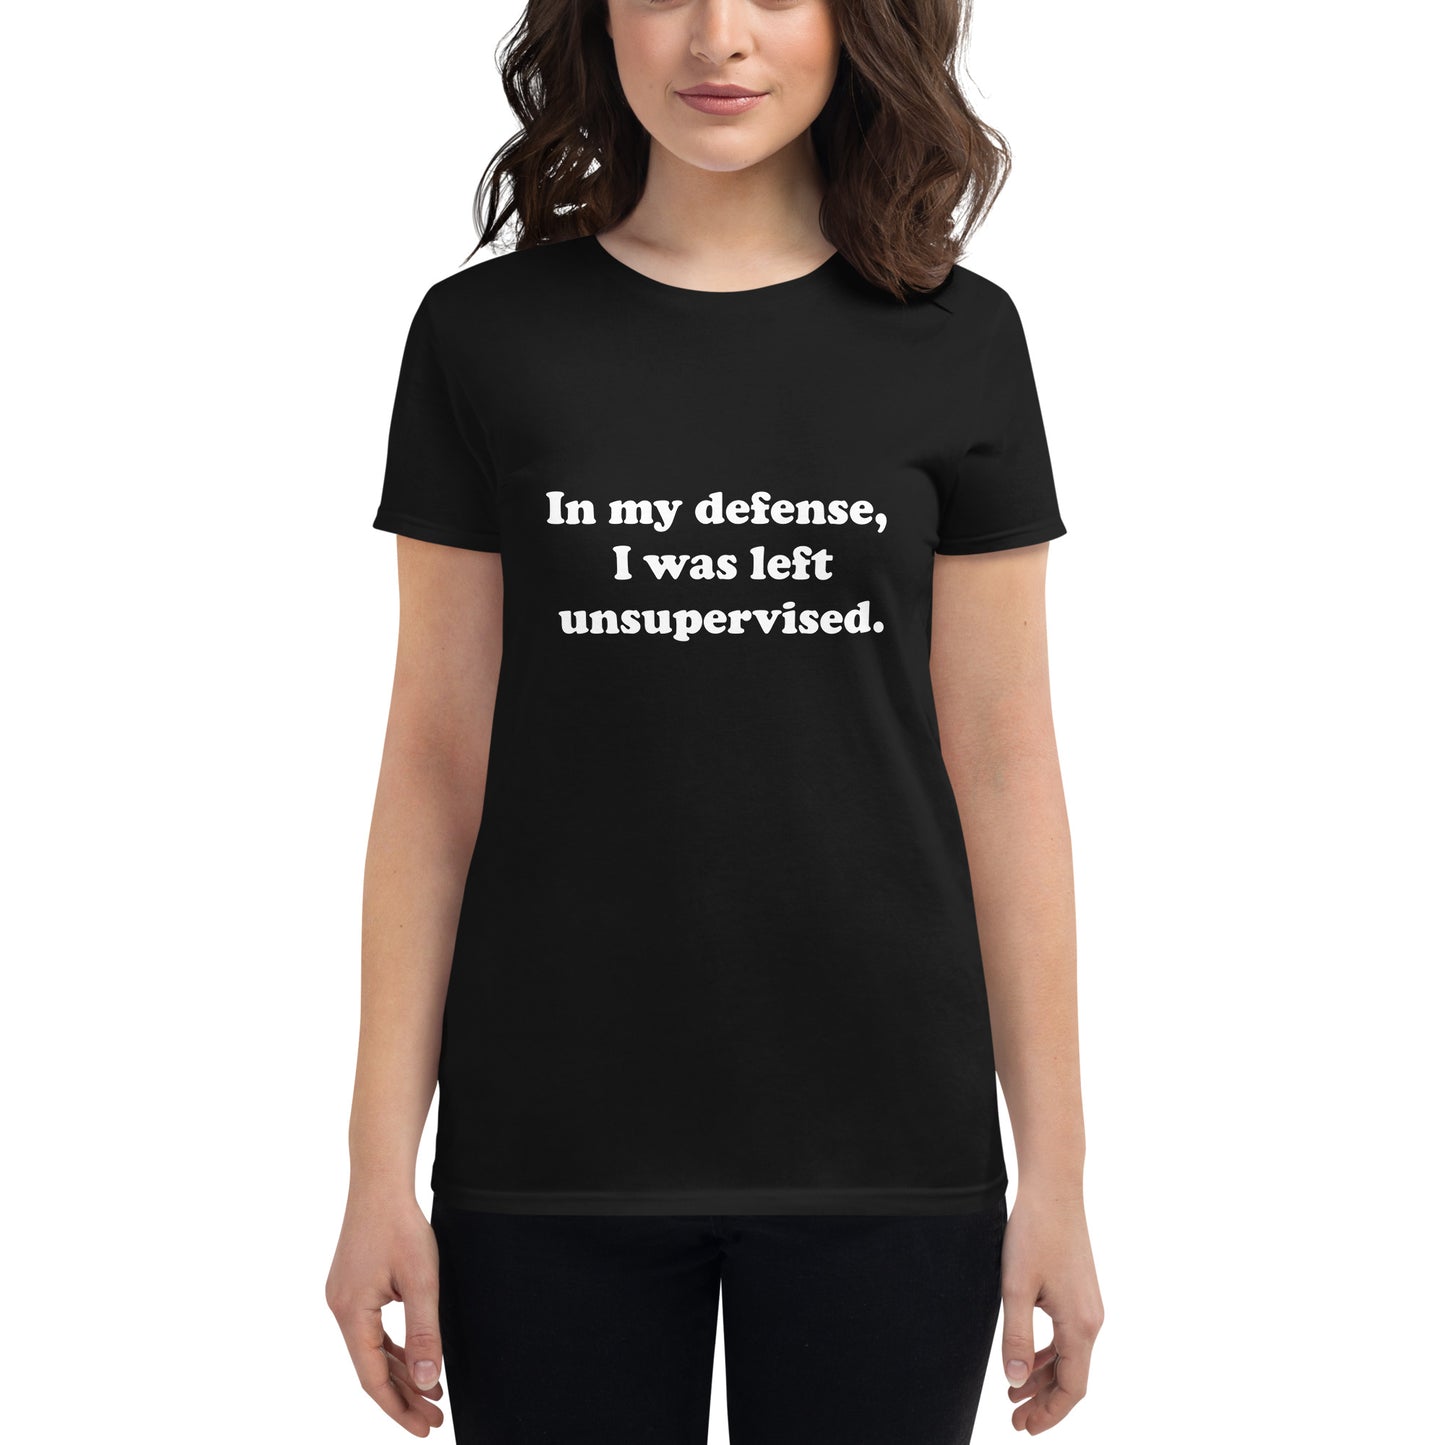 In my defense, I was left unsupervised women's T-shirt